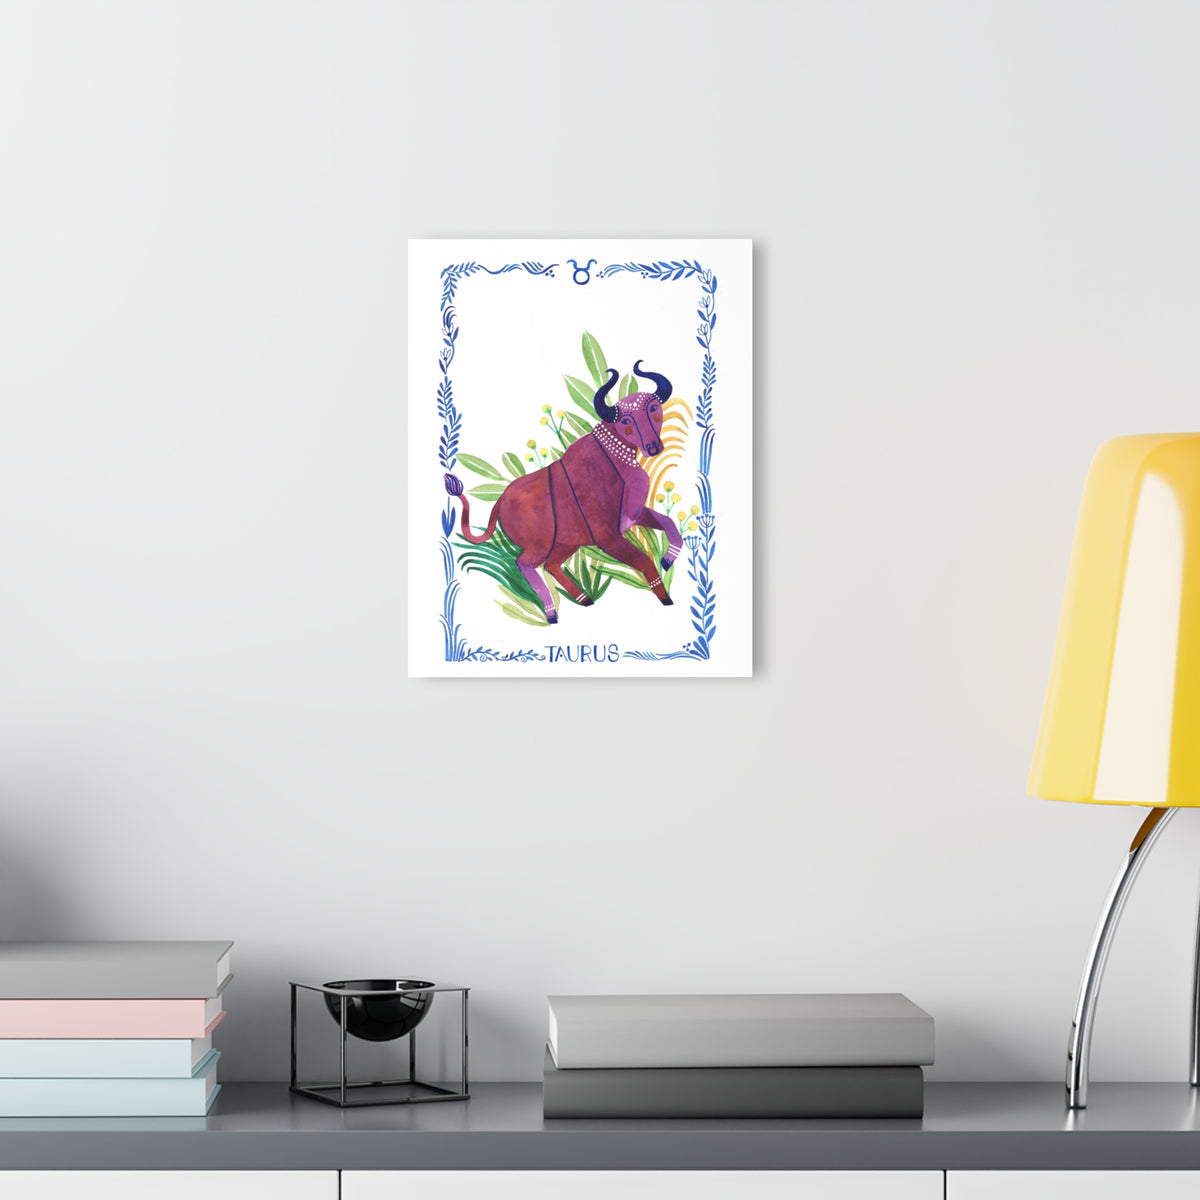 Earthly Delights: Taurus Acrylic Print with French Cleat Hanging